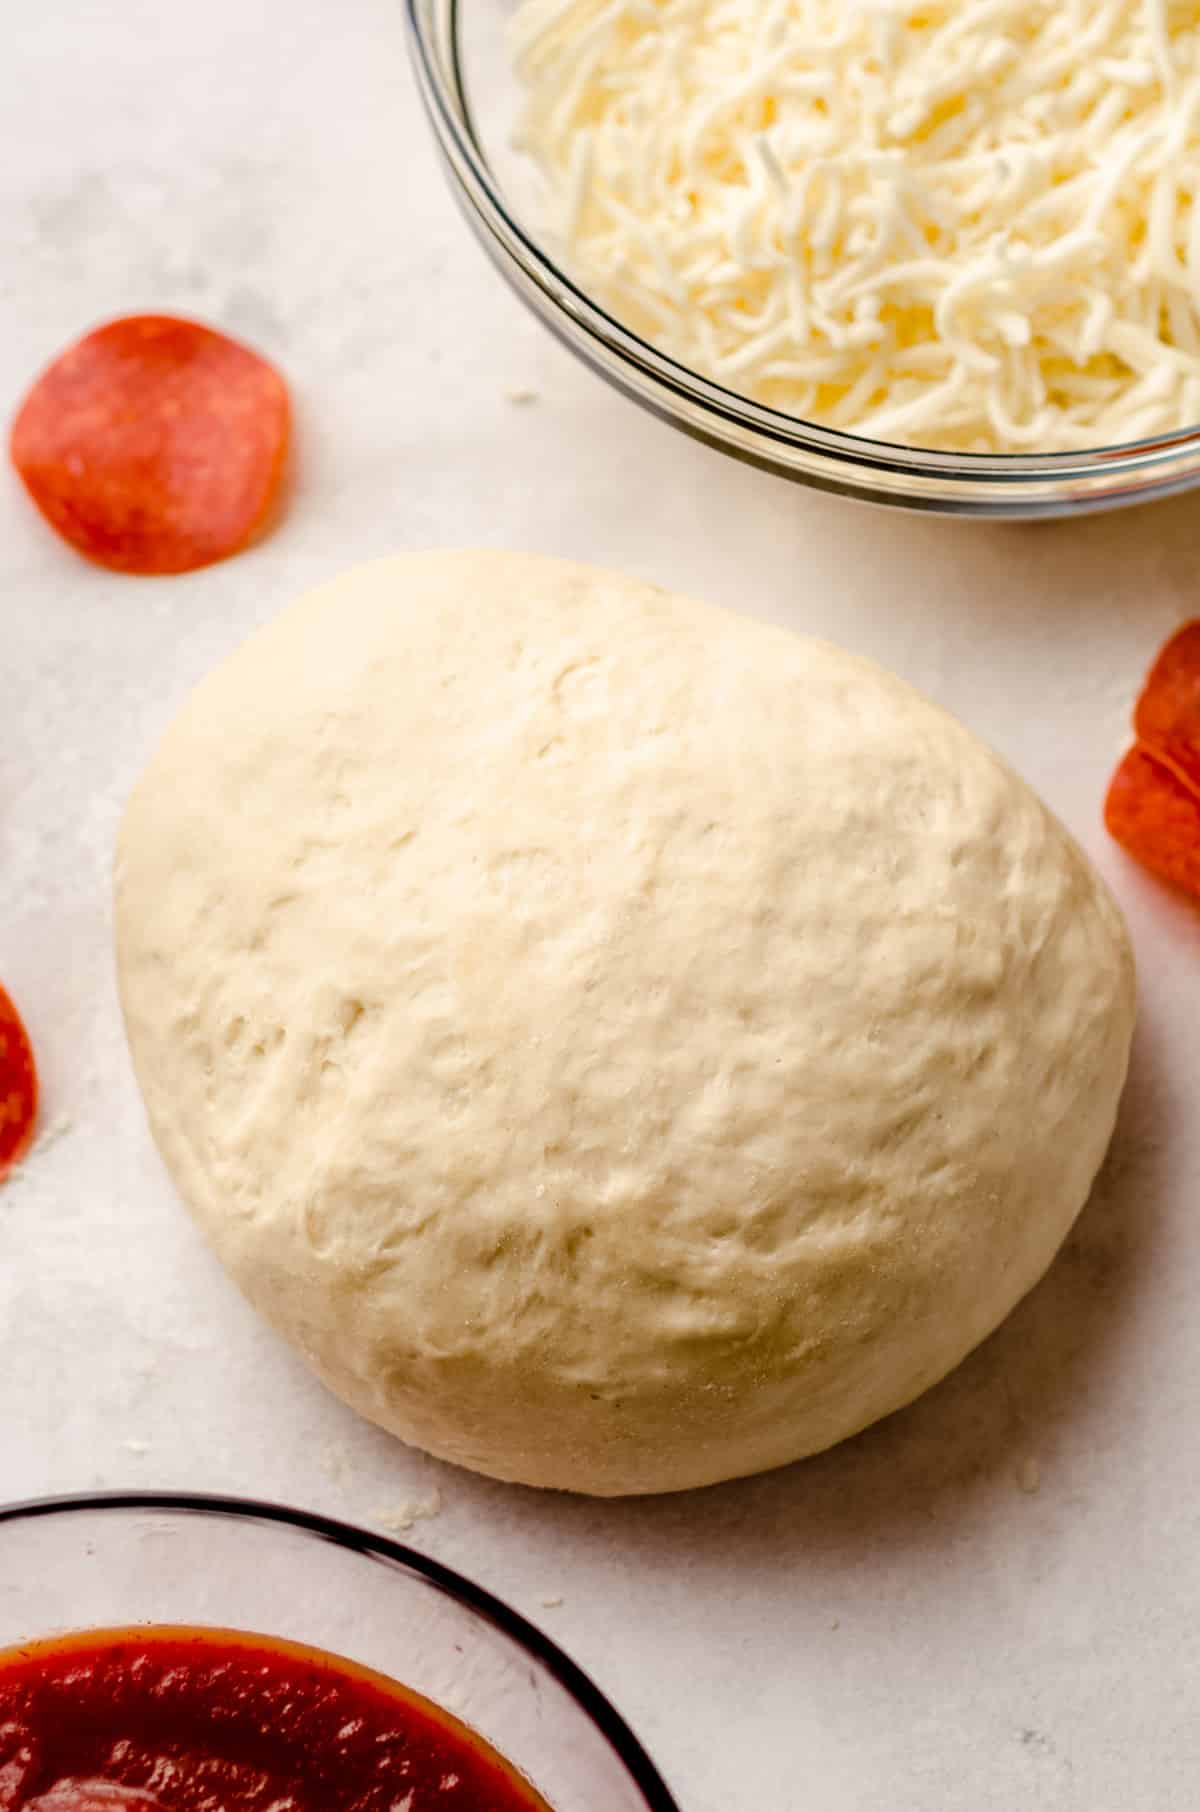 A large circle of pizza dough, with shredded mozzarella and pizza sauce in the background.